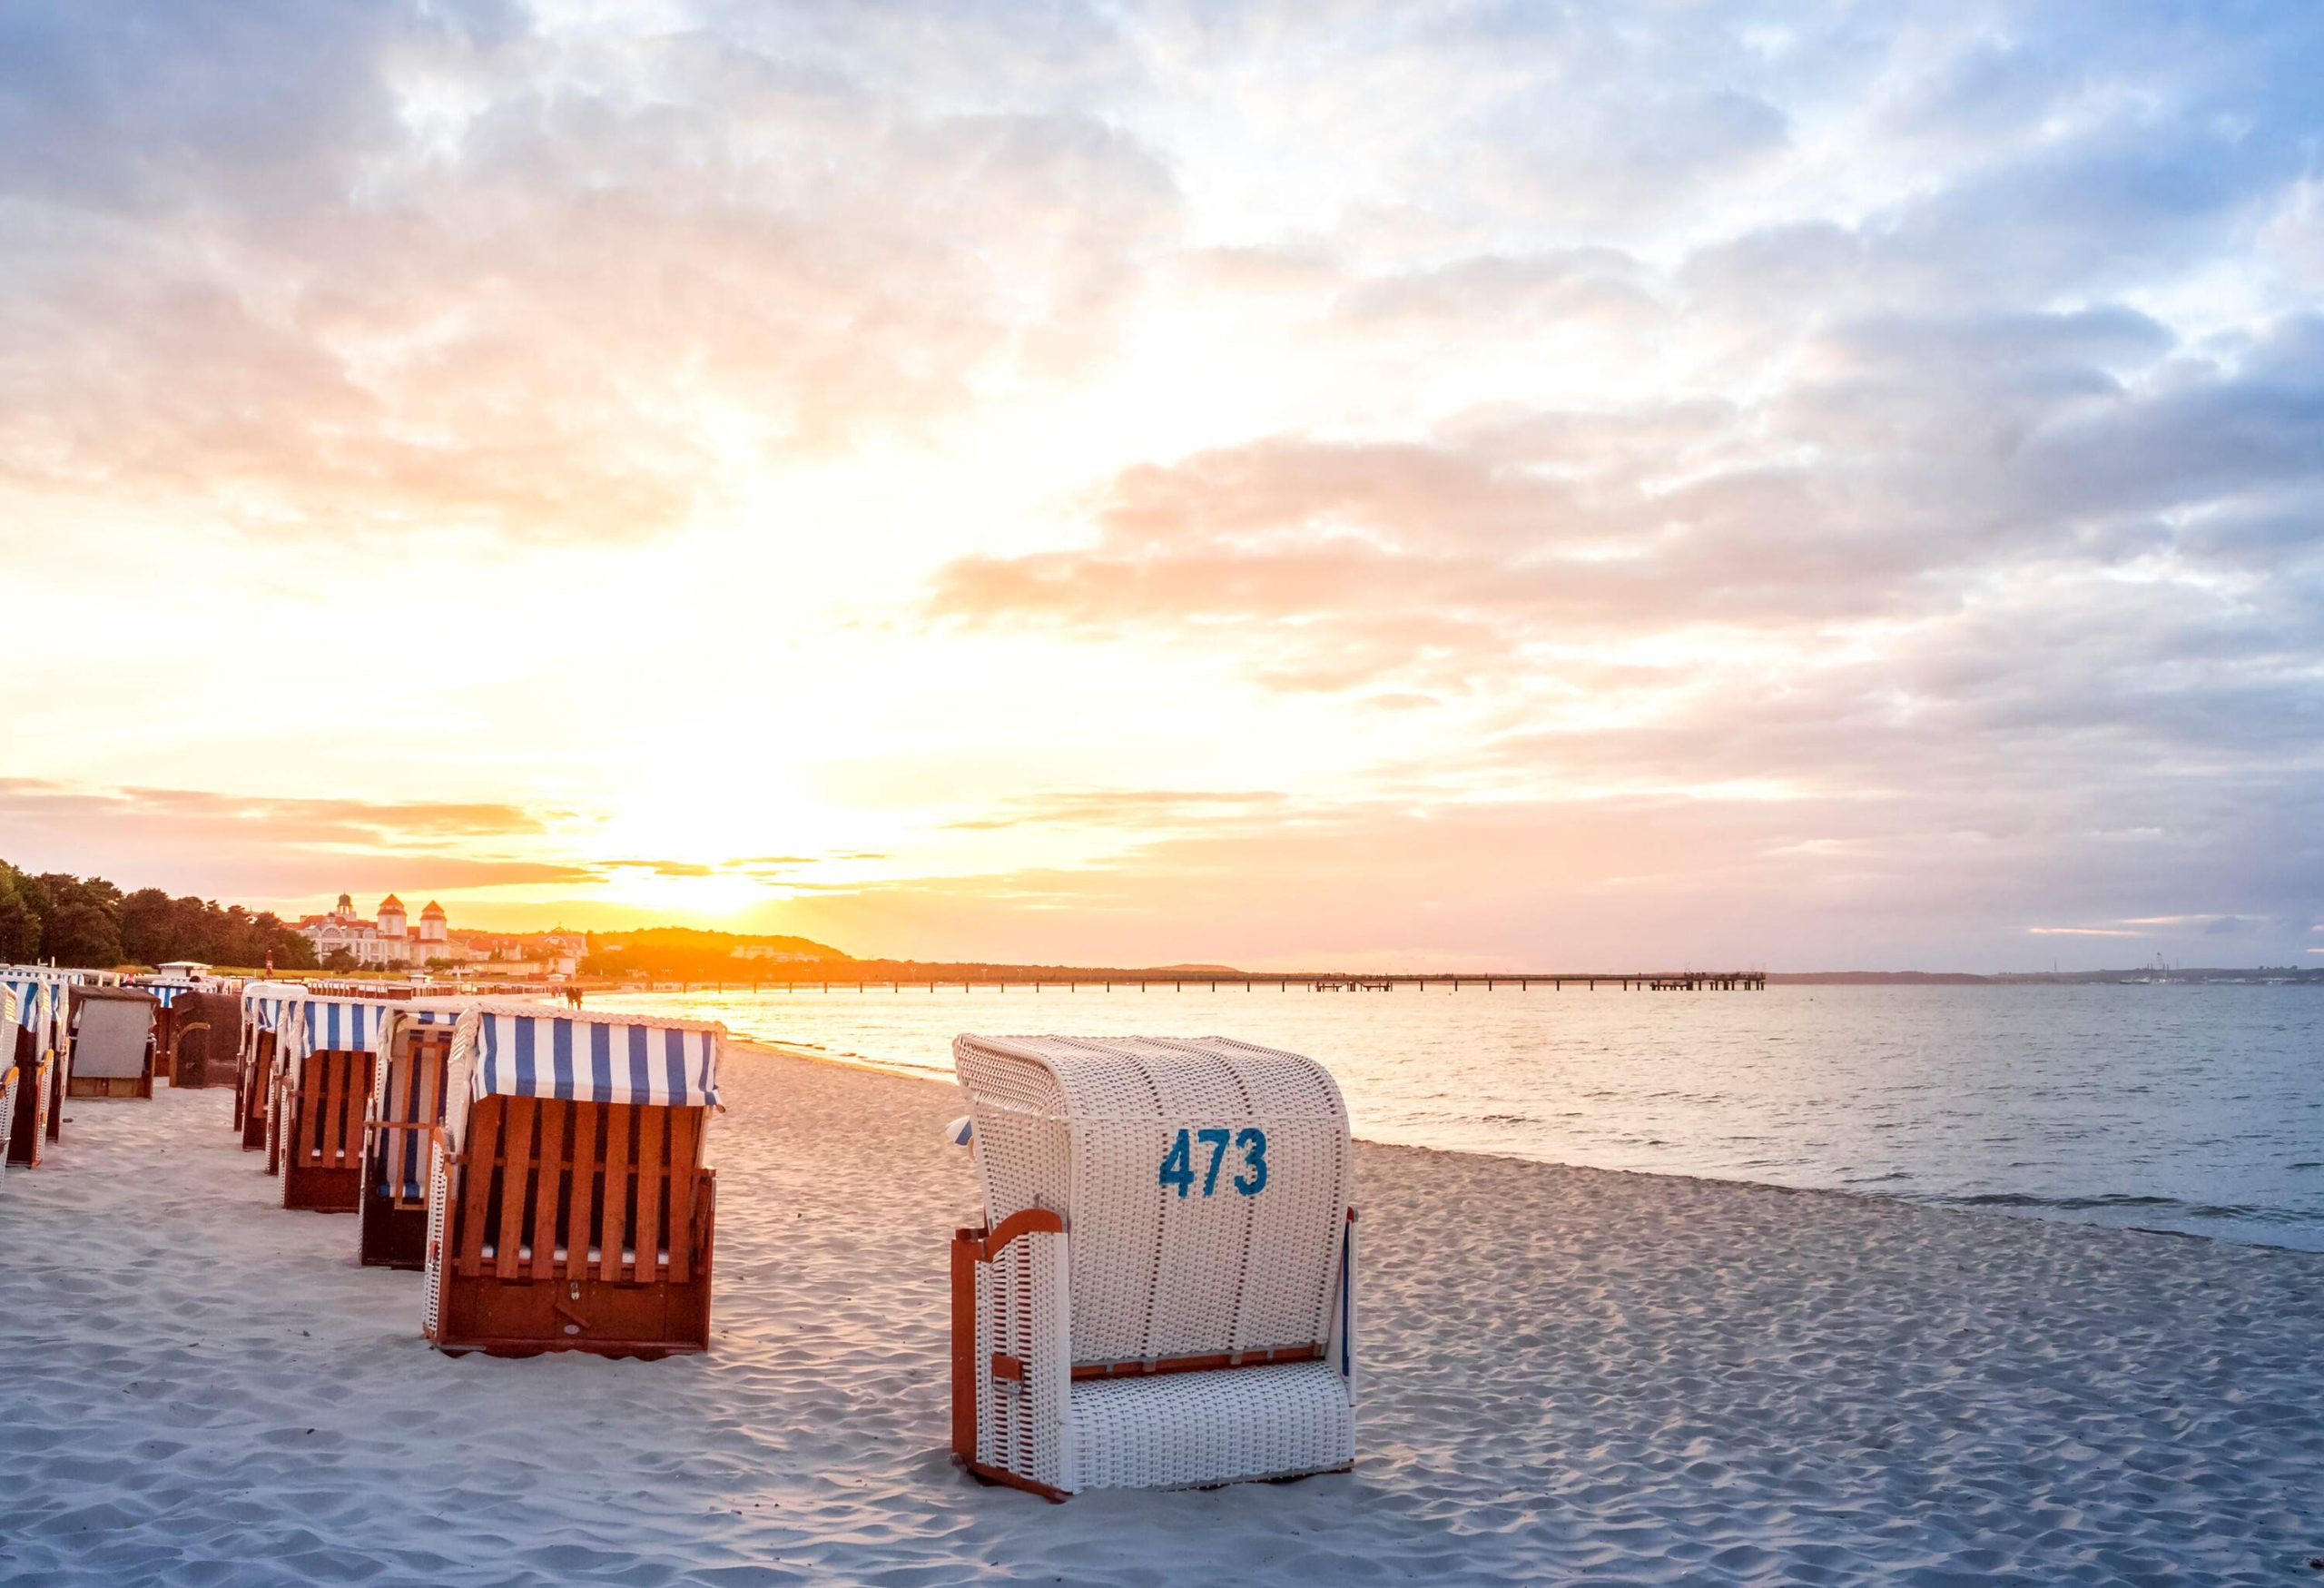 A row of roofed, wicker and wood beach chairs on the white sand shore of a beach against the dramatic sunset sky.